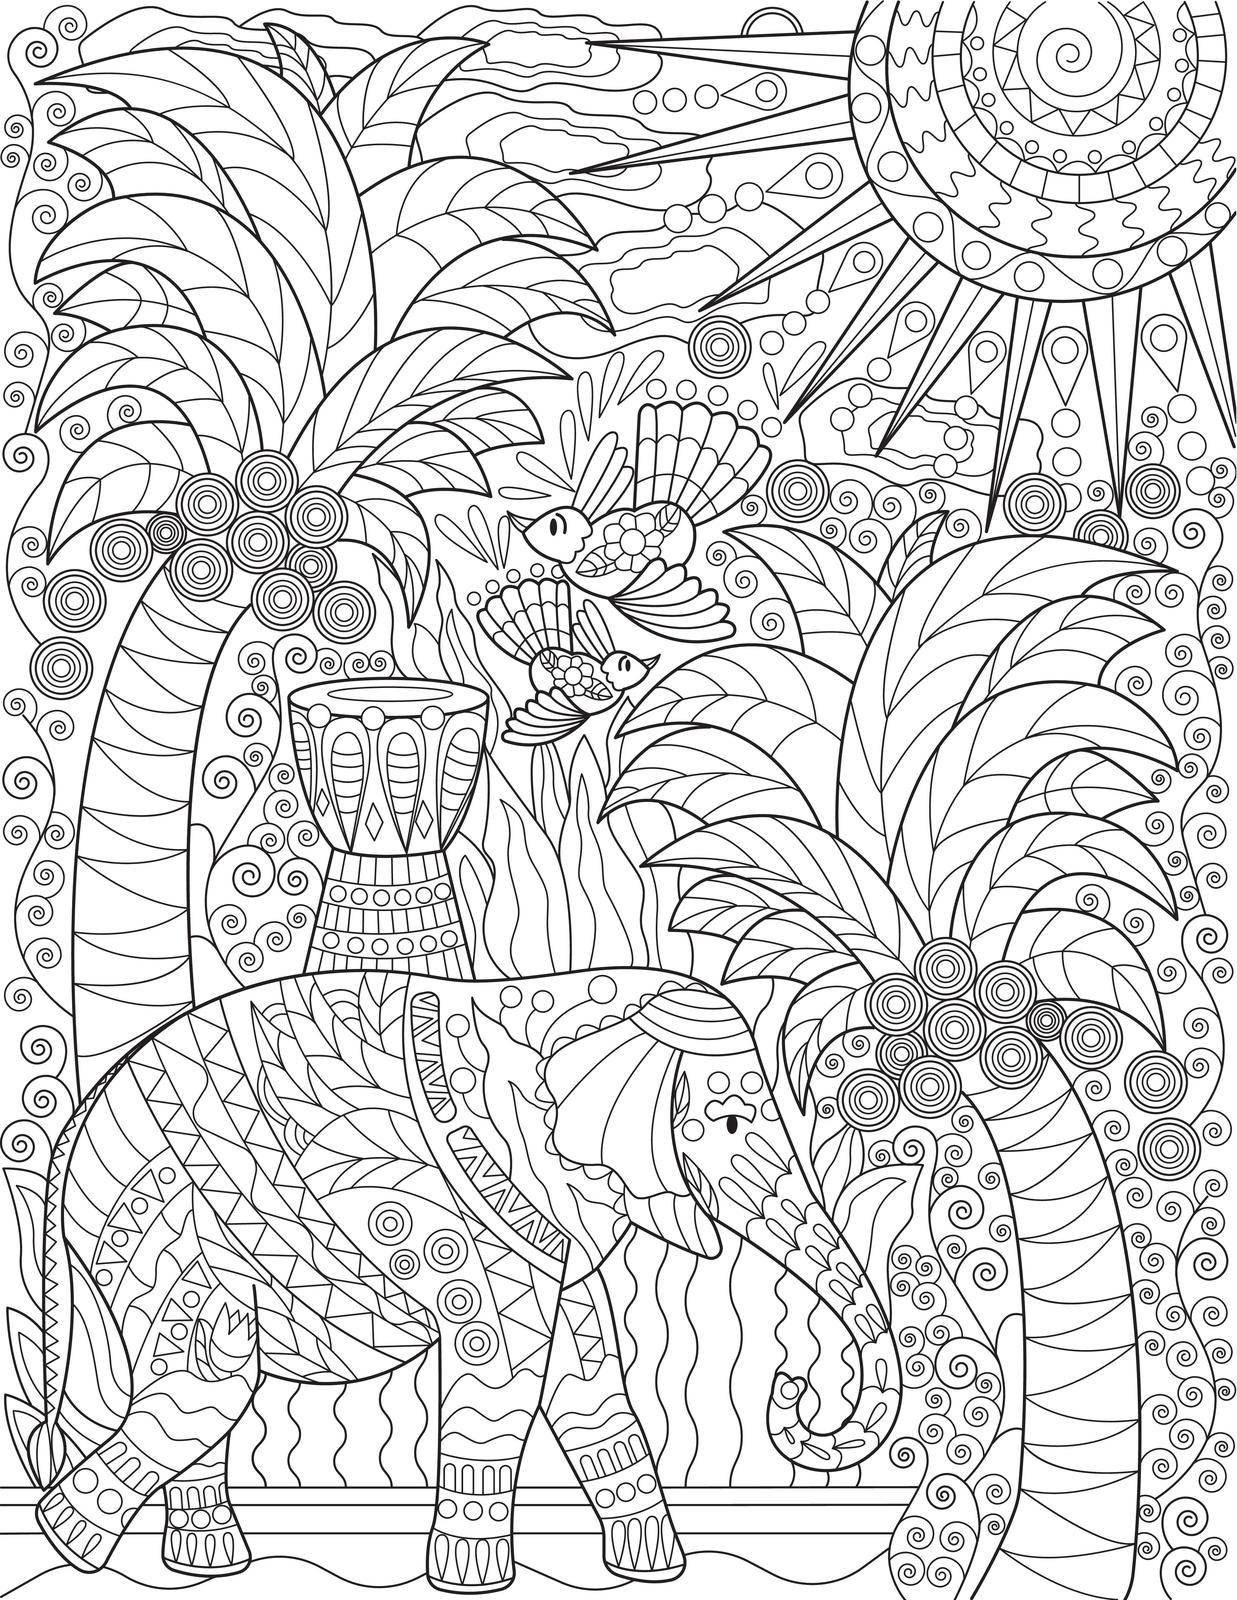 Large Elephant Walking Tall Coconut Trees Birds Flying Line Drawing.